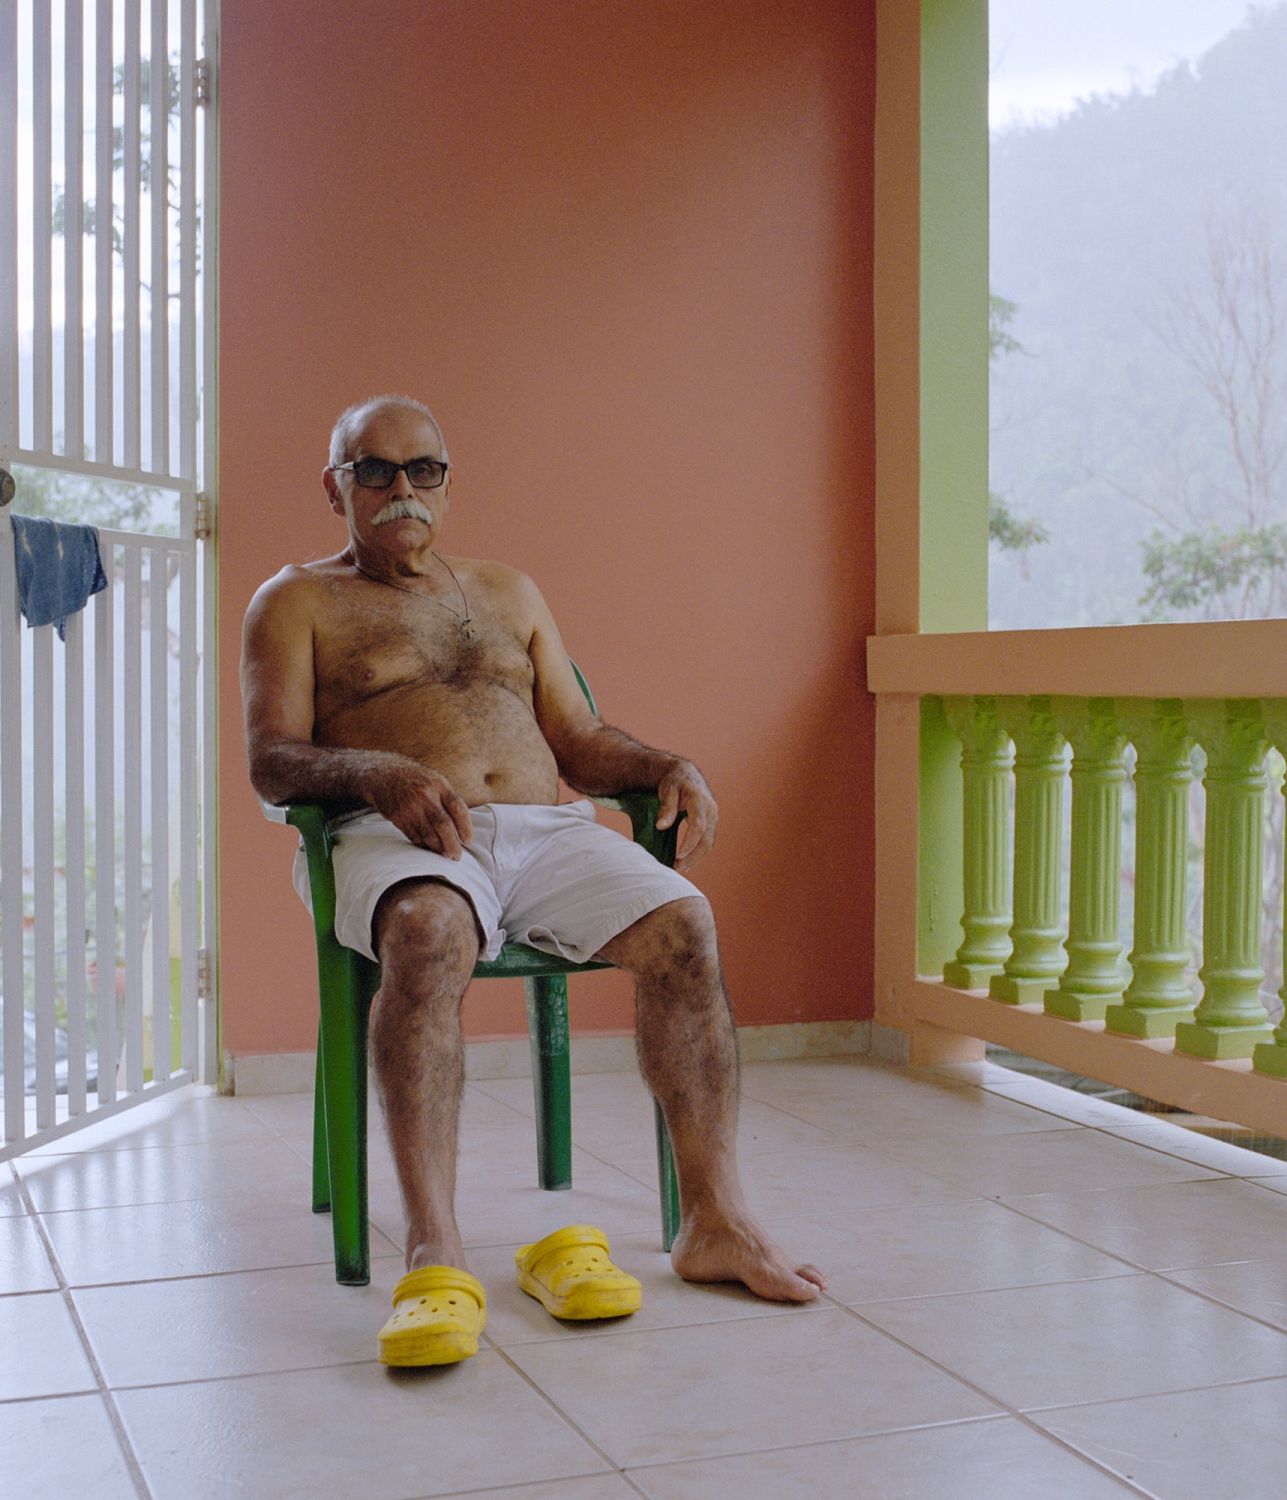 La Isla Del Encanto; Borikén - Uncle Coco sits on his porch and takes in the smells and...